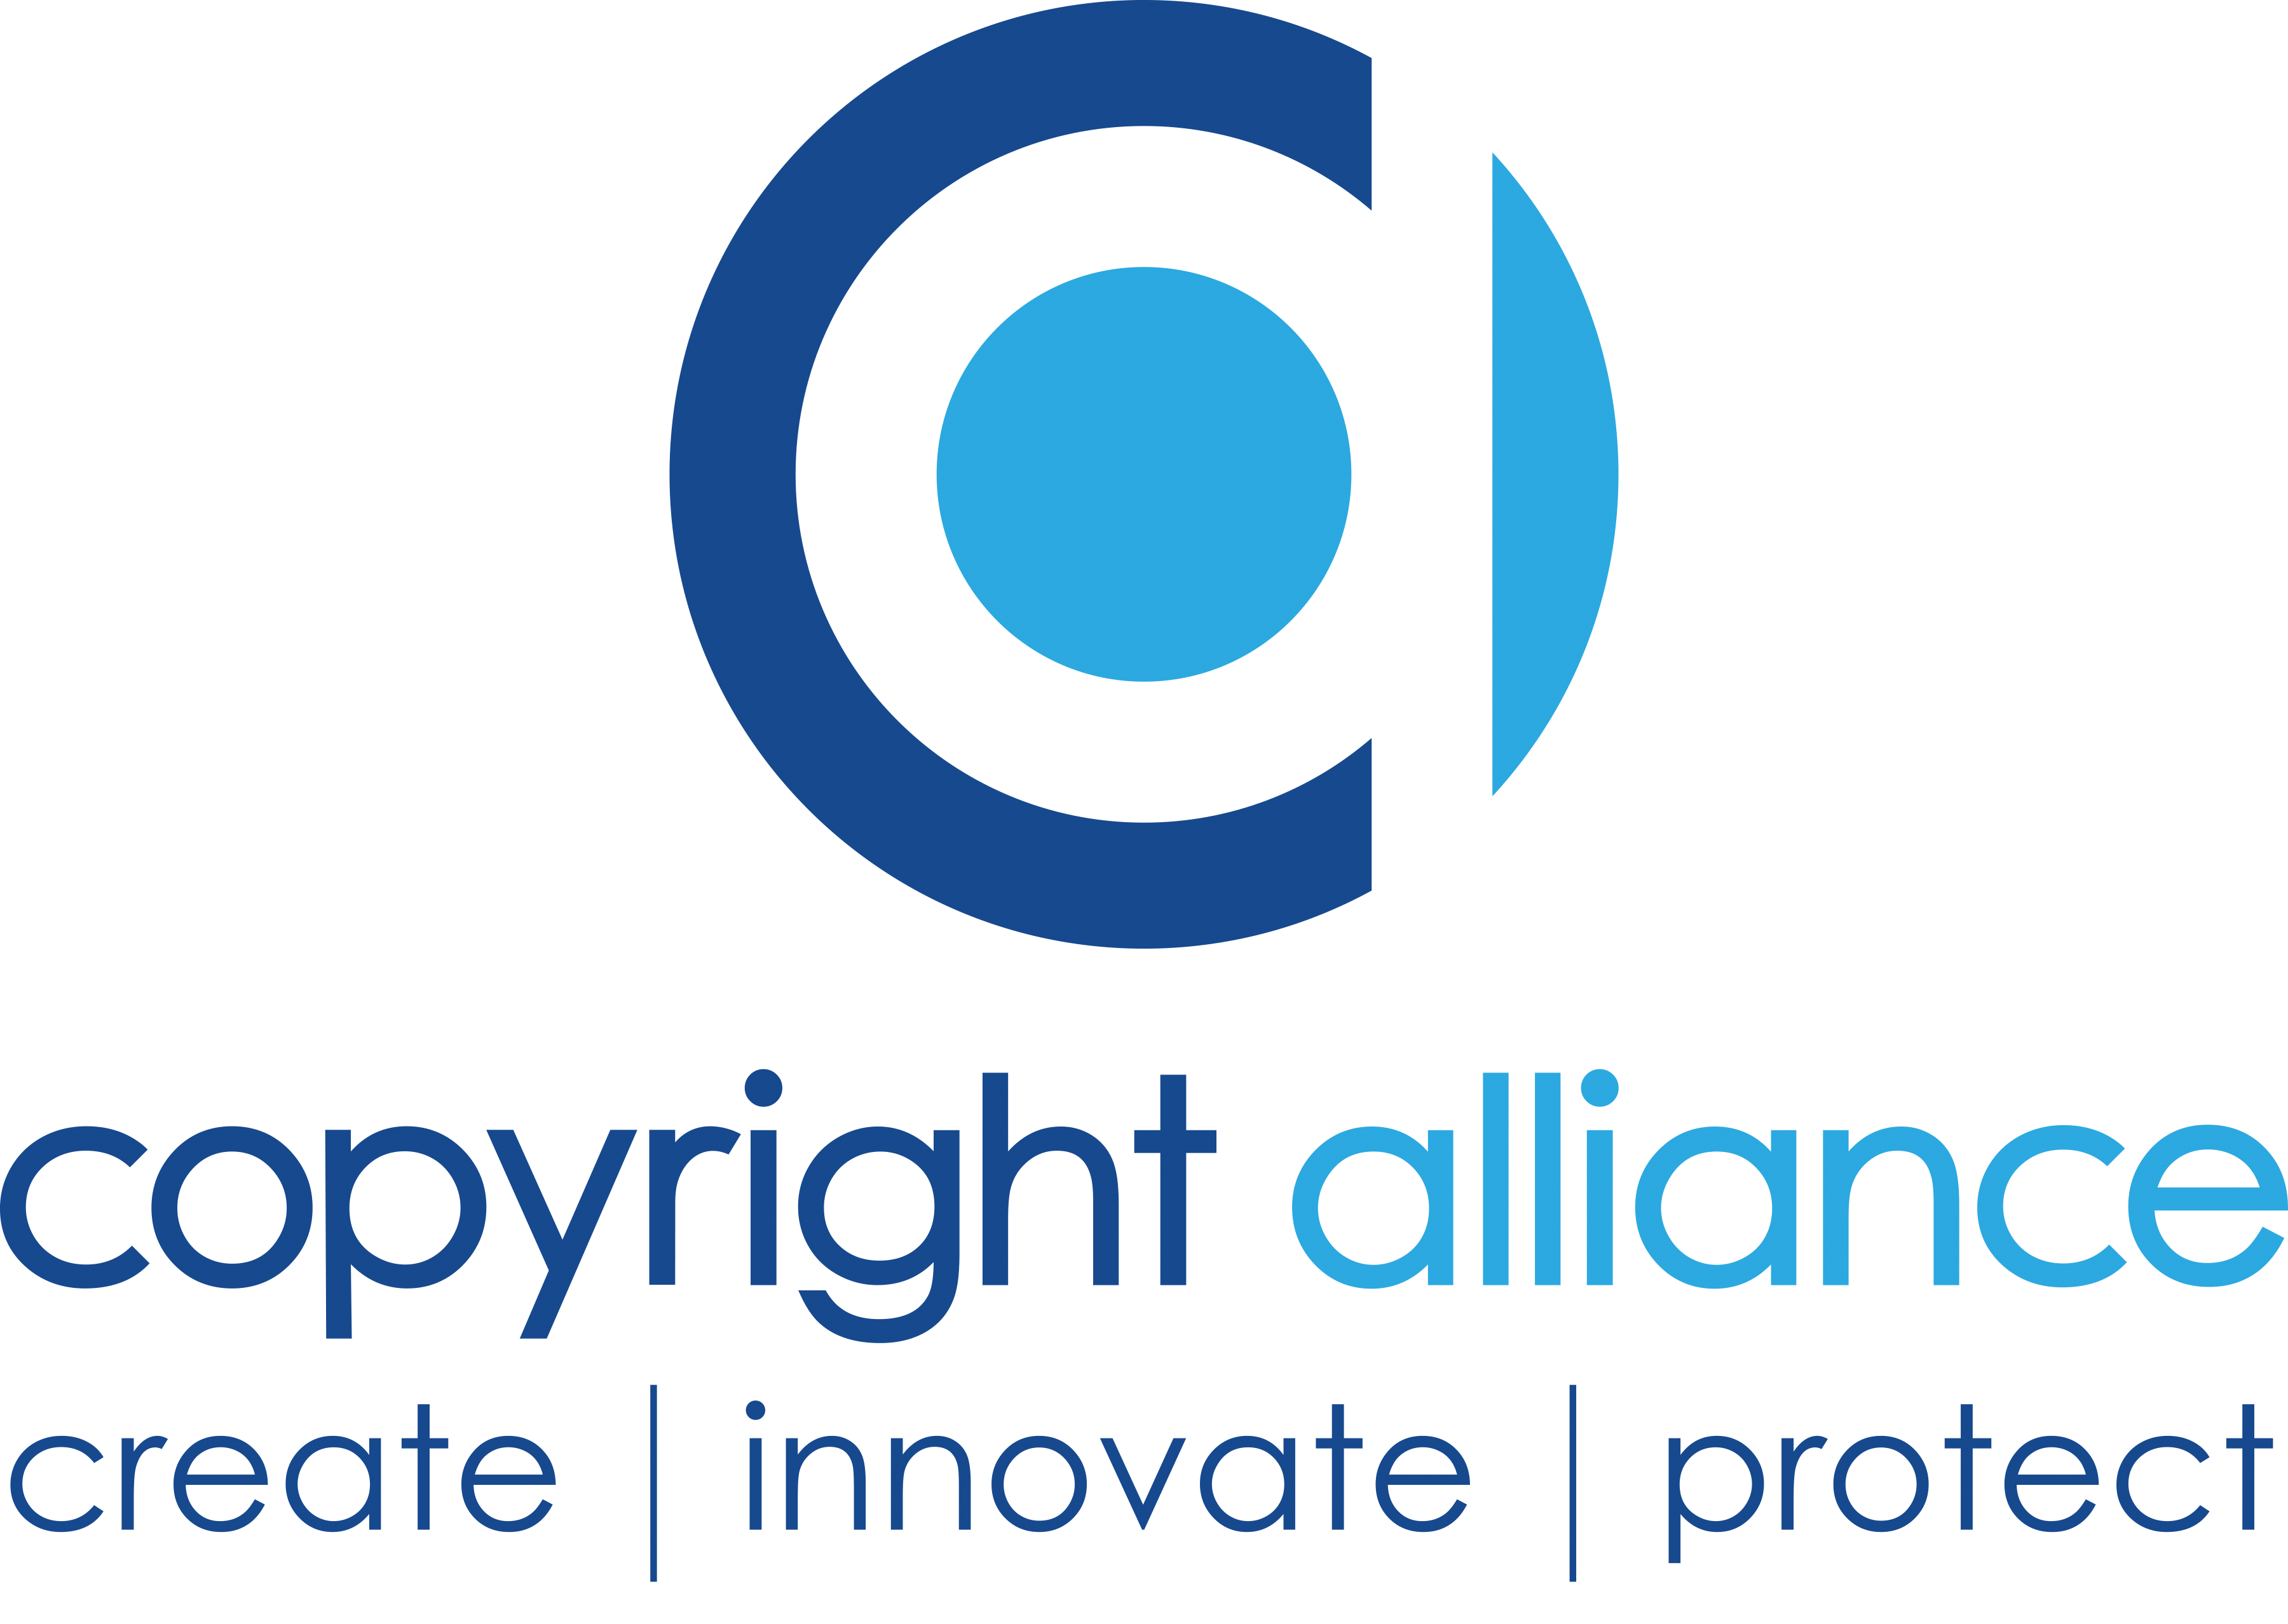 Copyright Alliance Unified Voice Of The Copyright Community